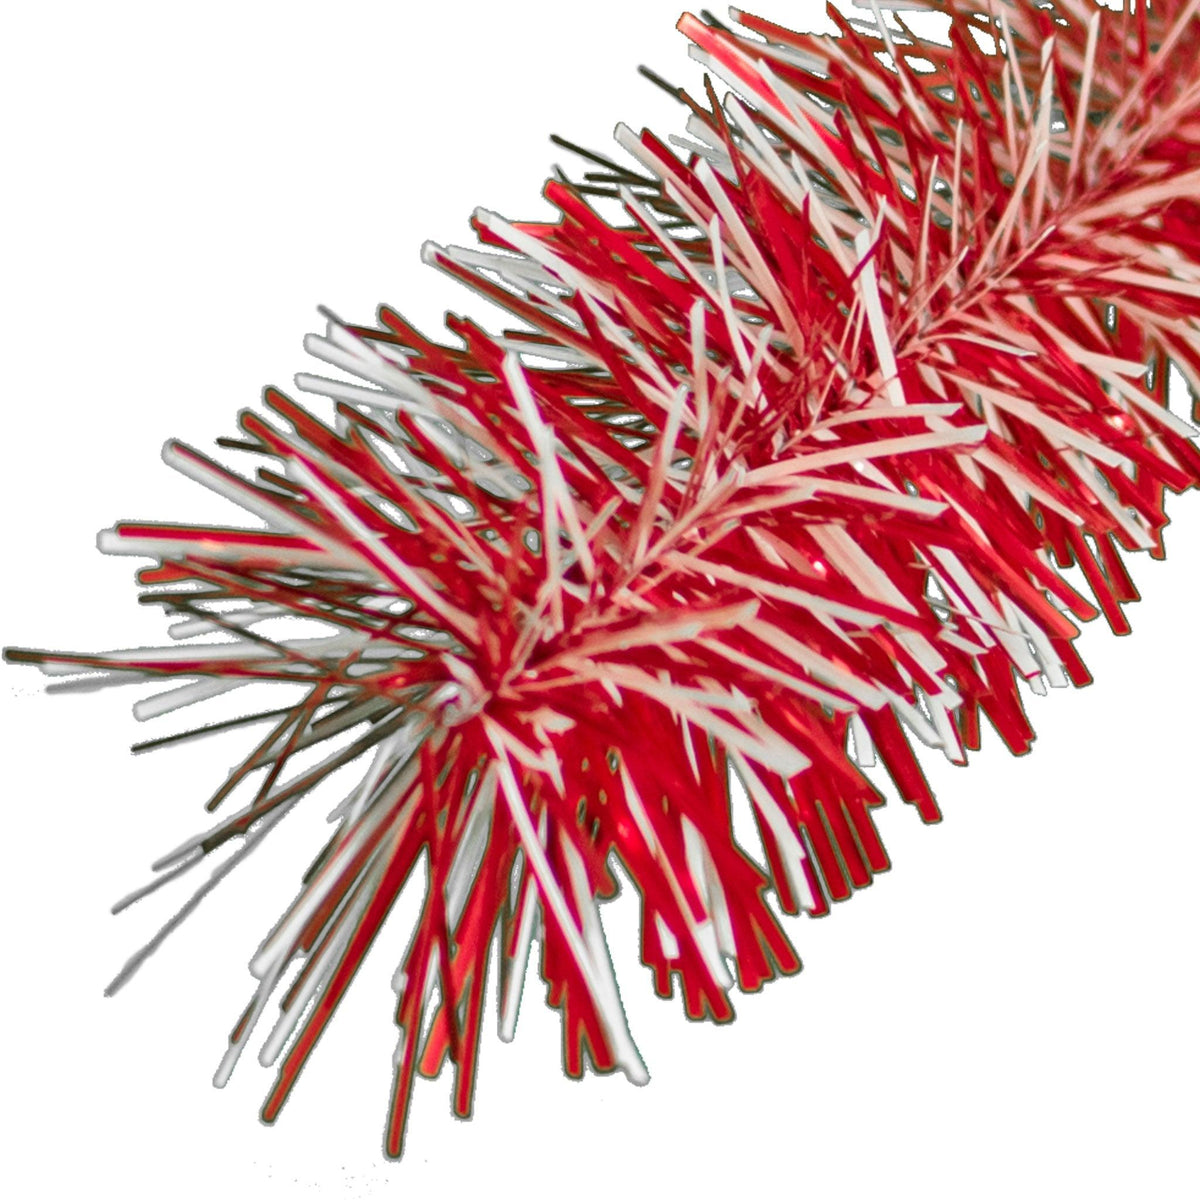 Lee Display's brand new 25ft Shiny Red and White Tinsel Garlands and Fringe Embellishments on sale at leedisplay.com